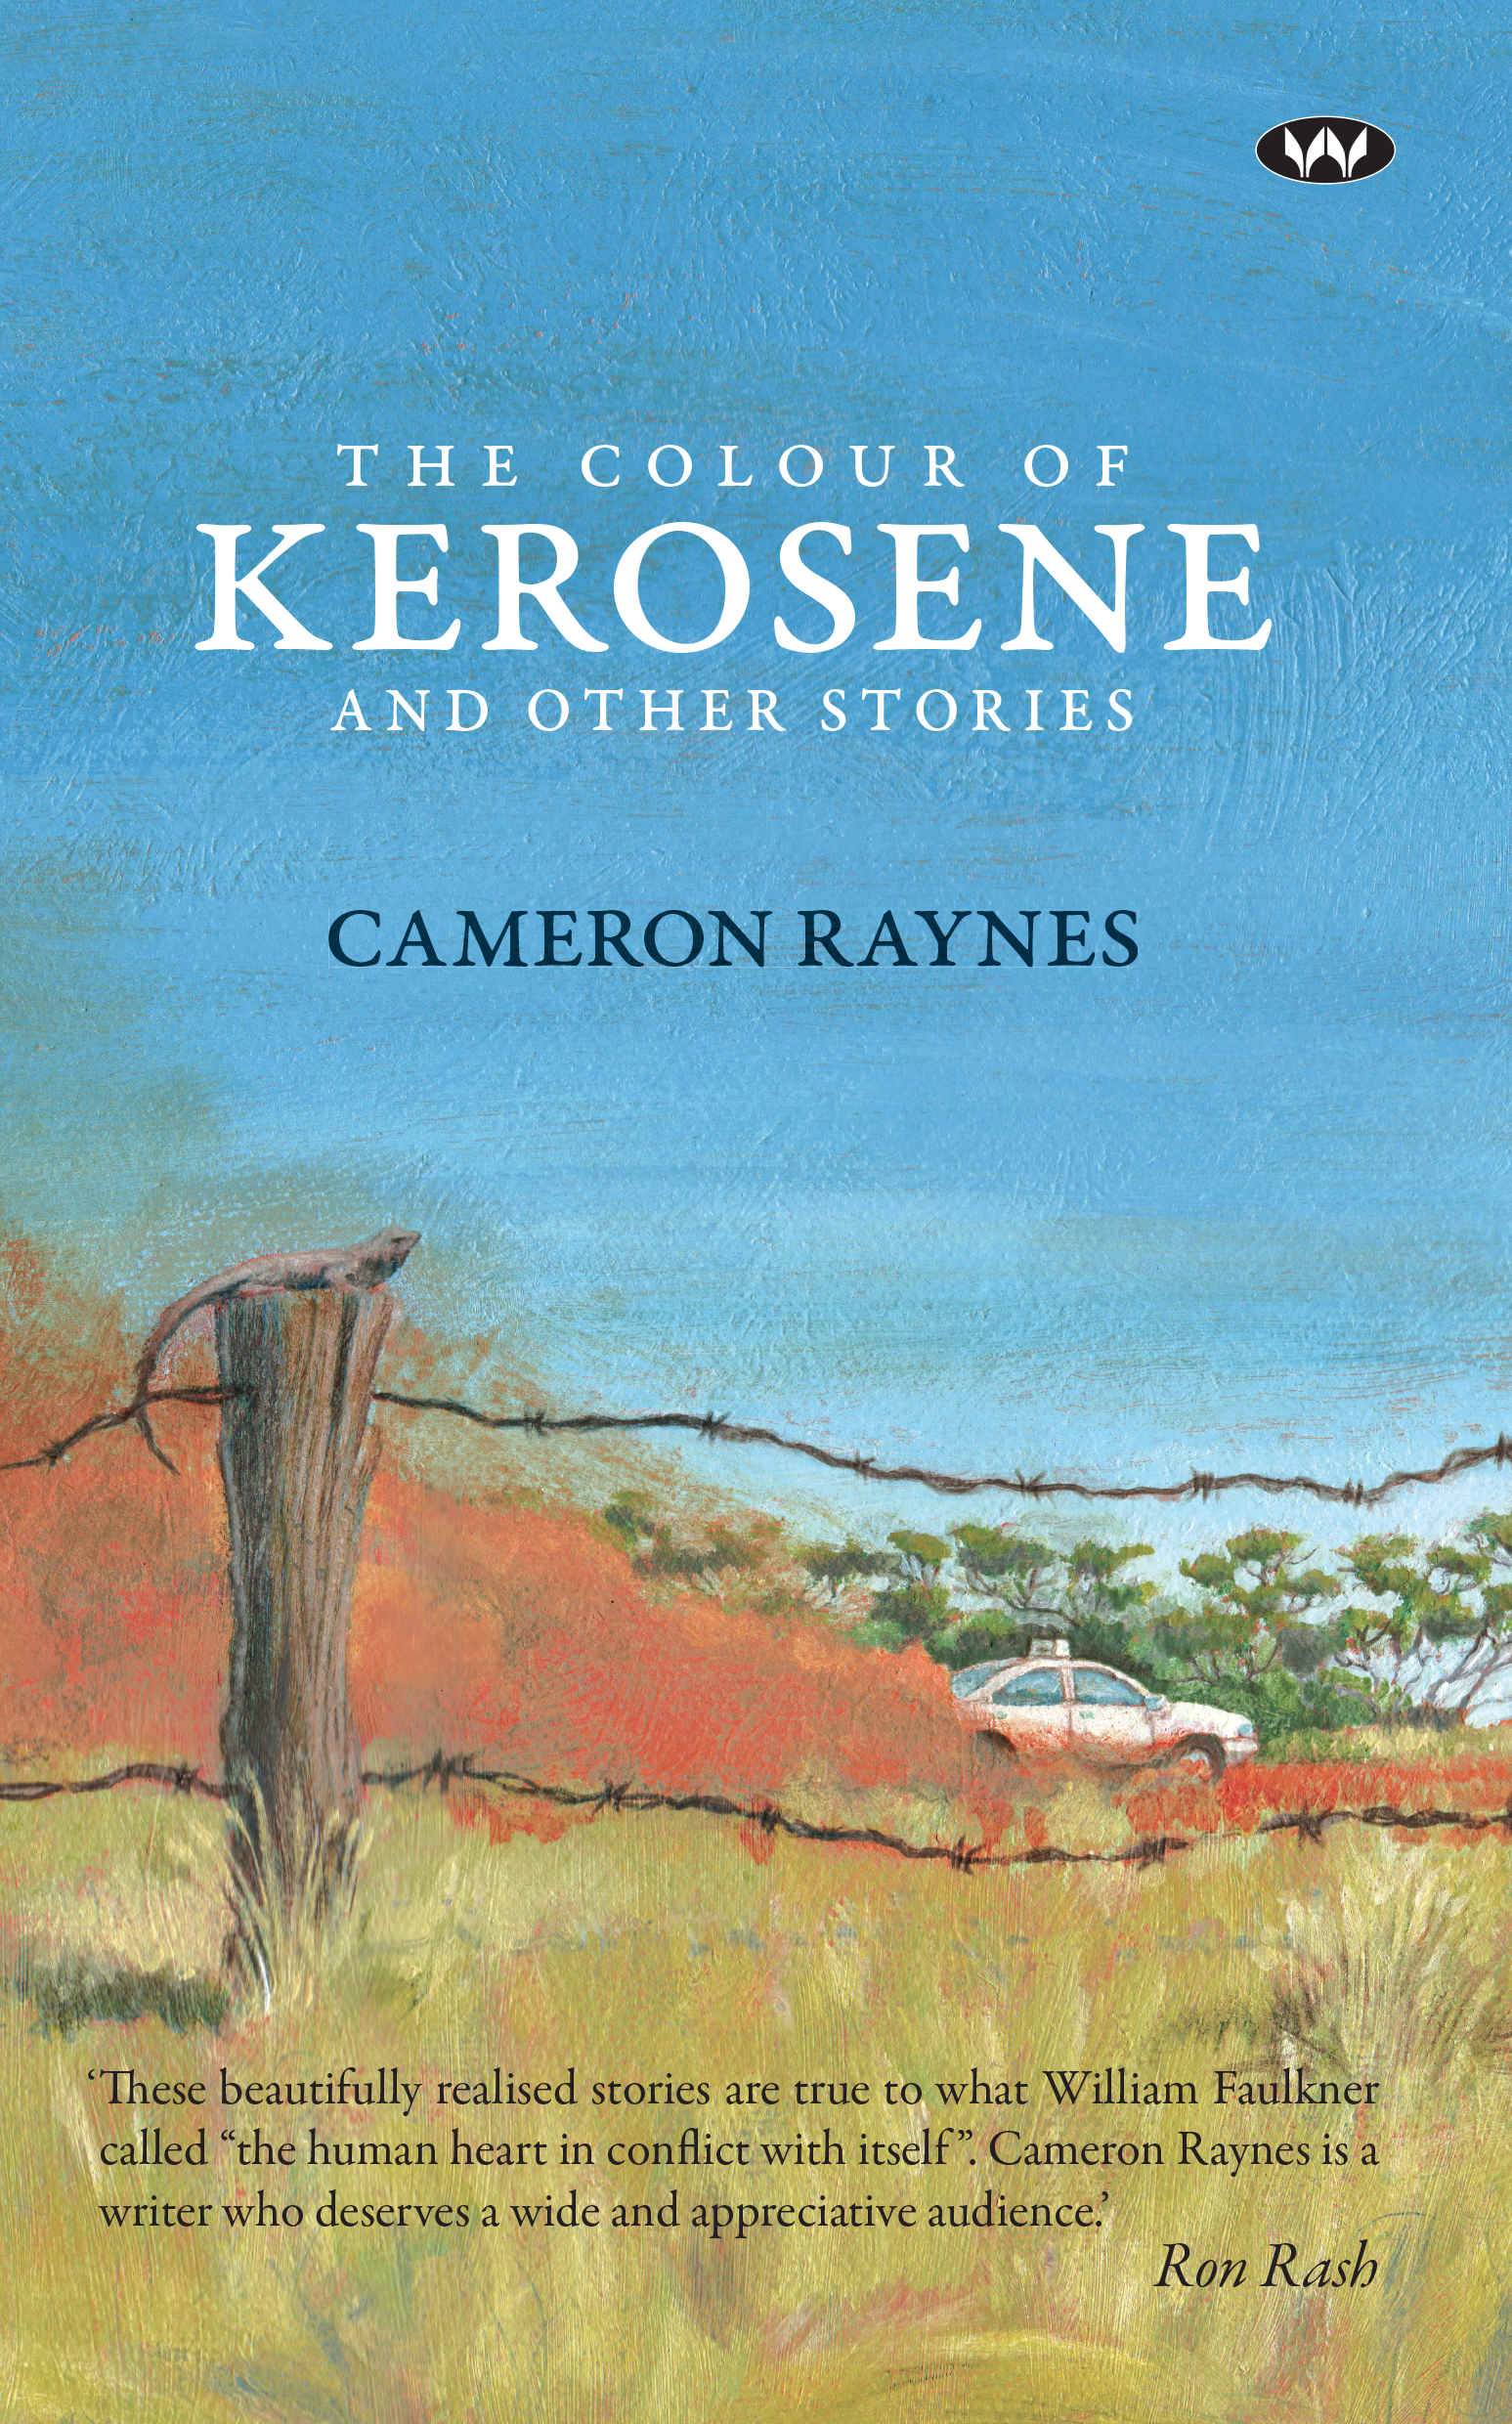 The Colour of Kerosene and Other Stories